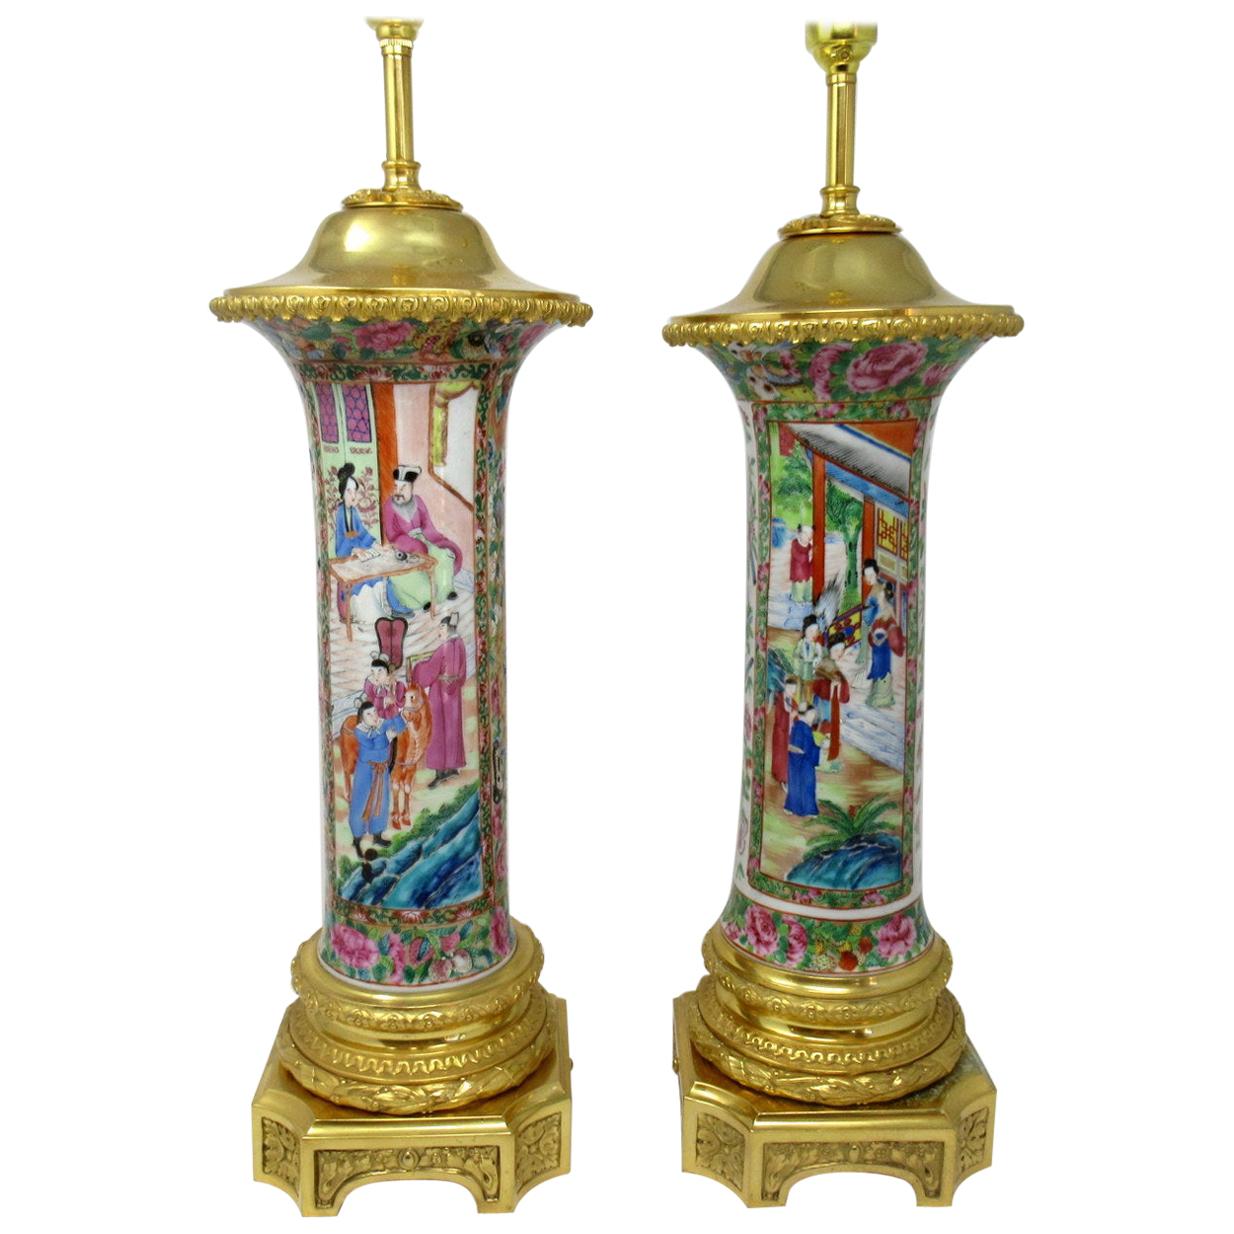 Famille Rose Medallion Canton Cantonese Ormolu Mounted Chinese Table Lamps Pair